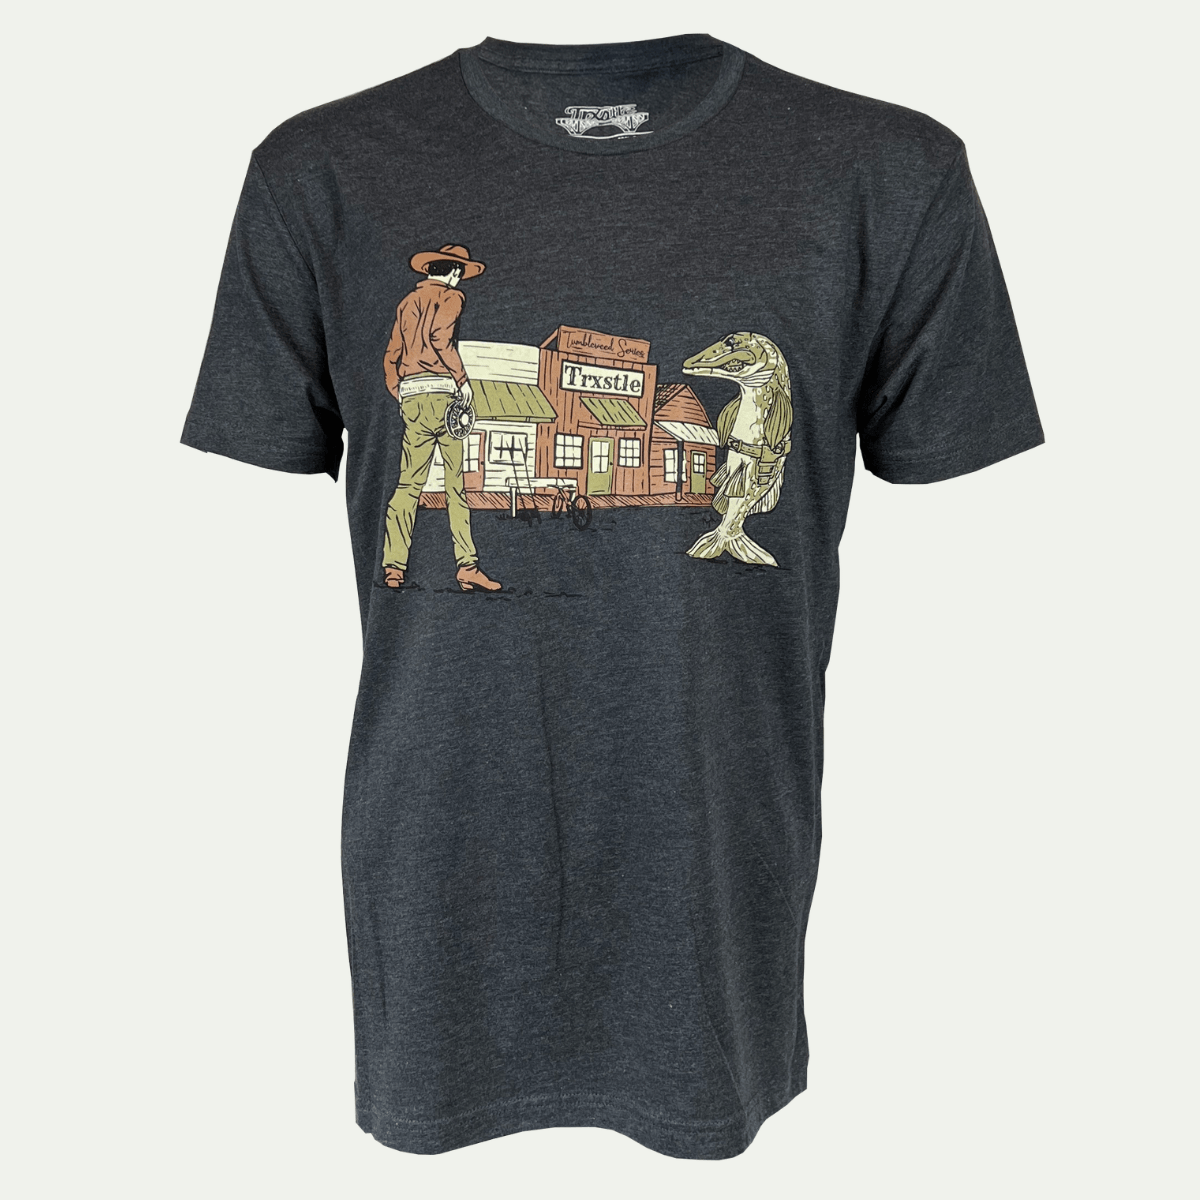 Trxstle FREE - Gilly The Kid Tee Green/Brown / XS